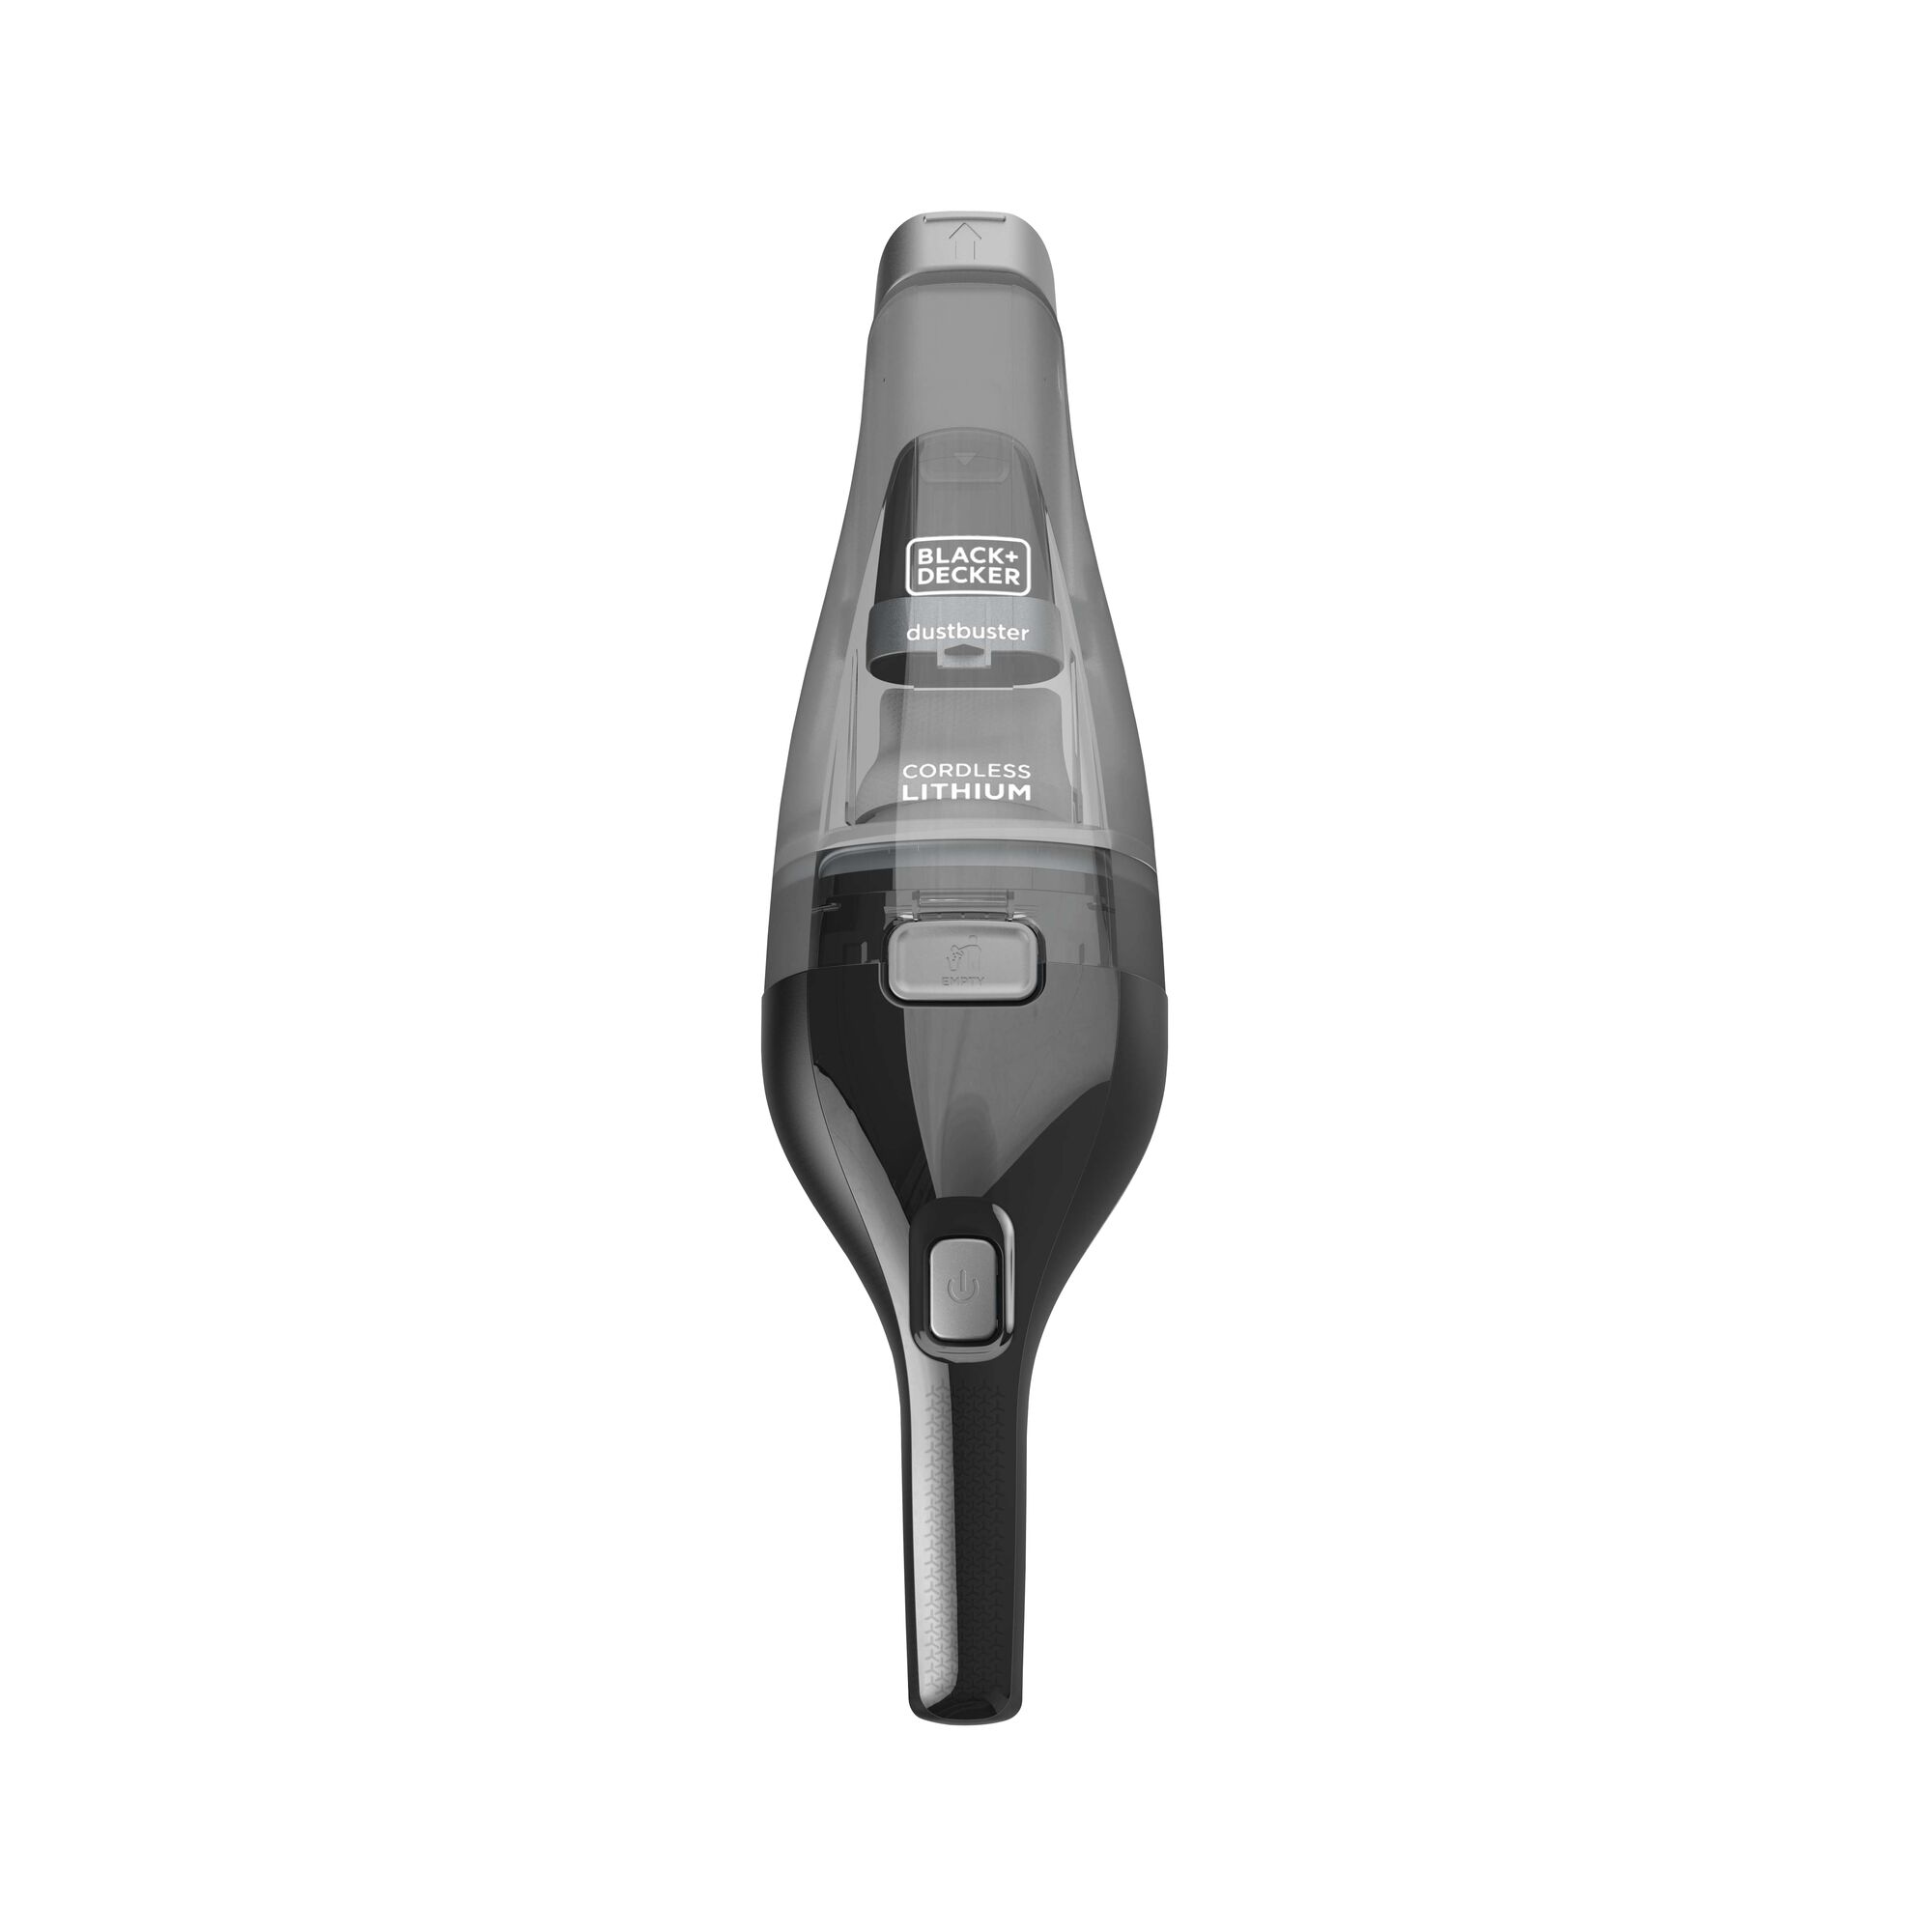 Profile of Dustbuster Quick Clean Cordless Hand Vacuum.